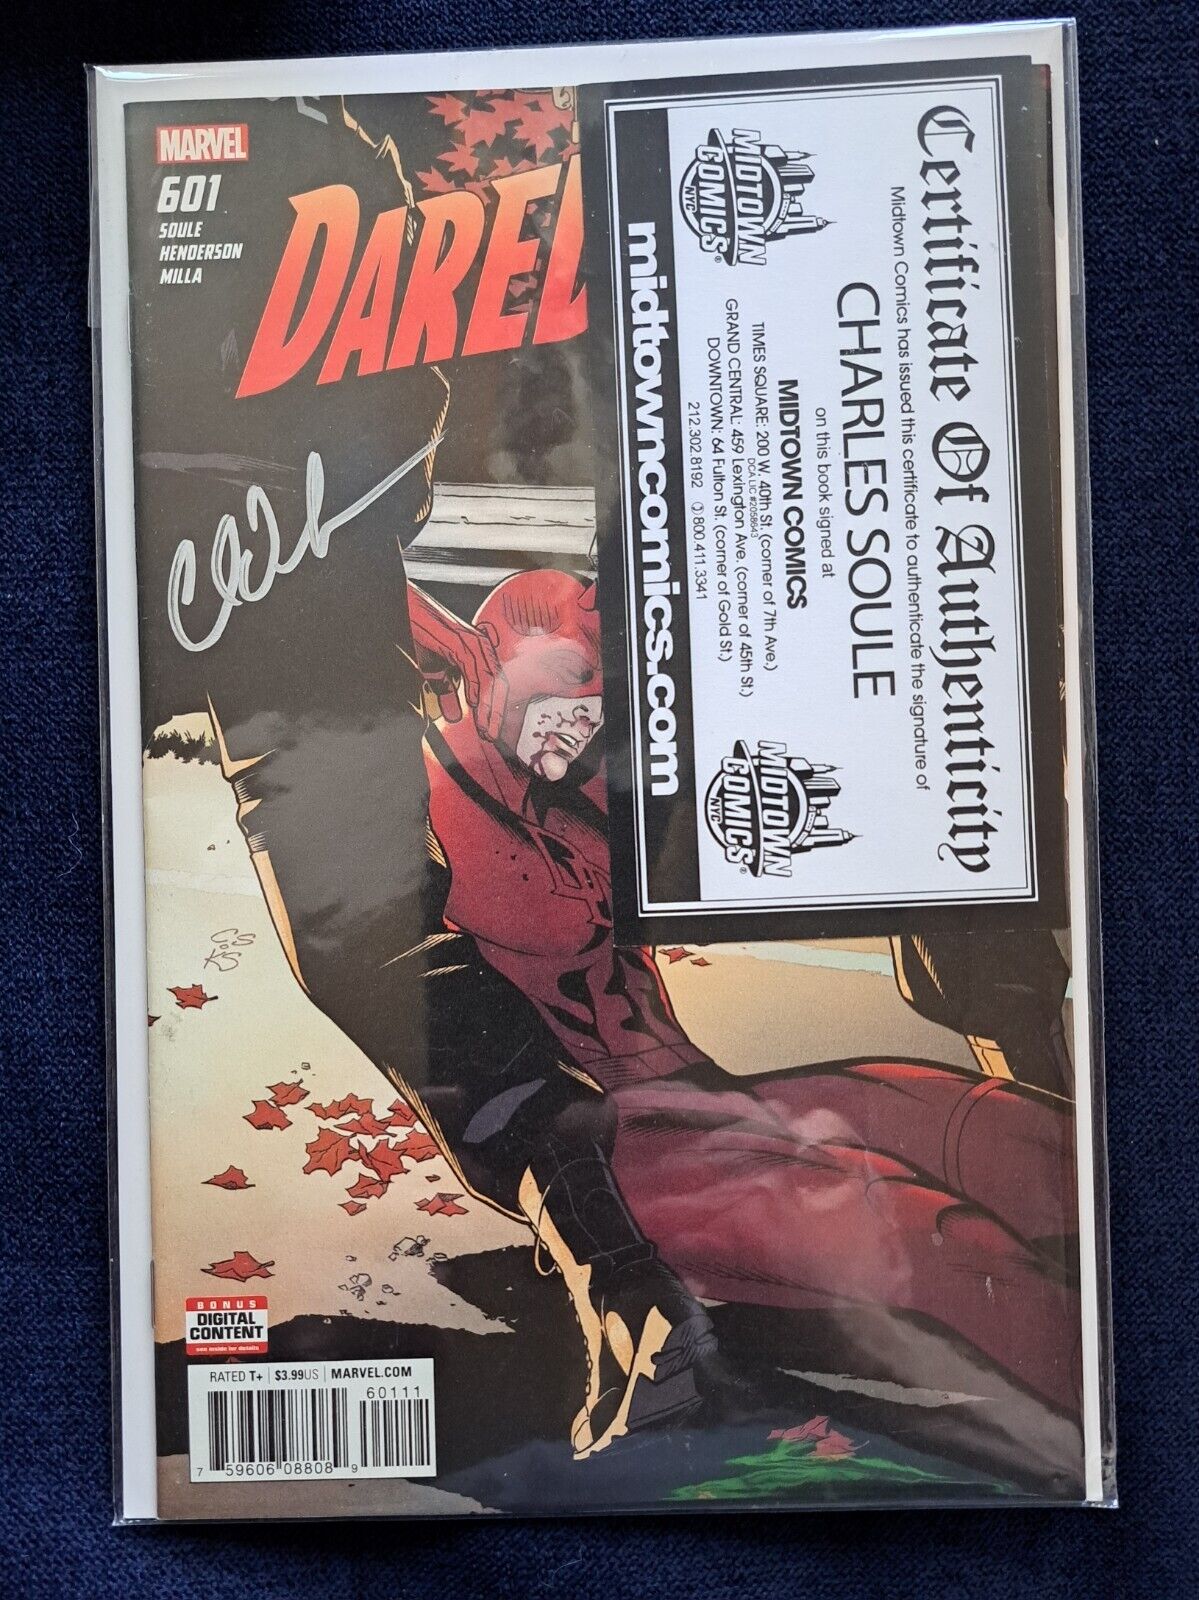 DAREDEVIL #601 Marvel SIGNED BY CHARLES SOULE MIDTOWN COMICS NYC